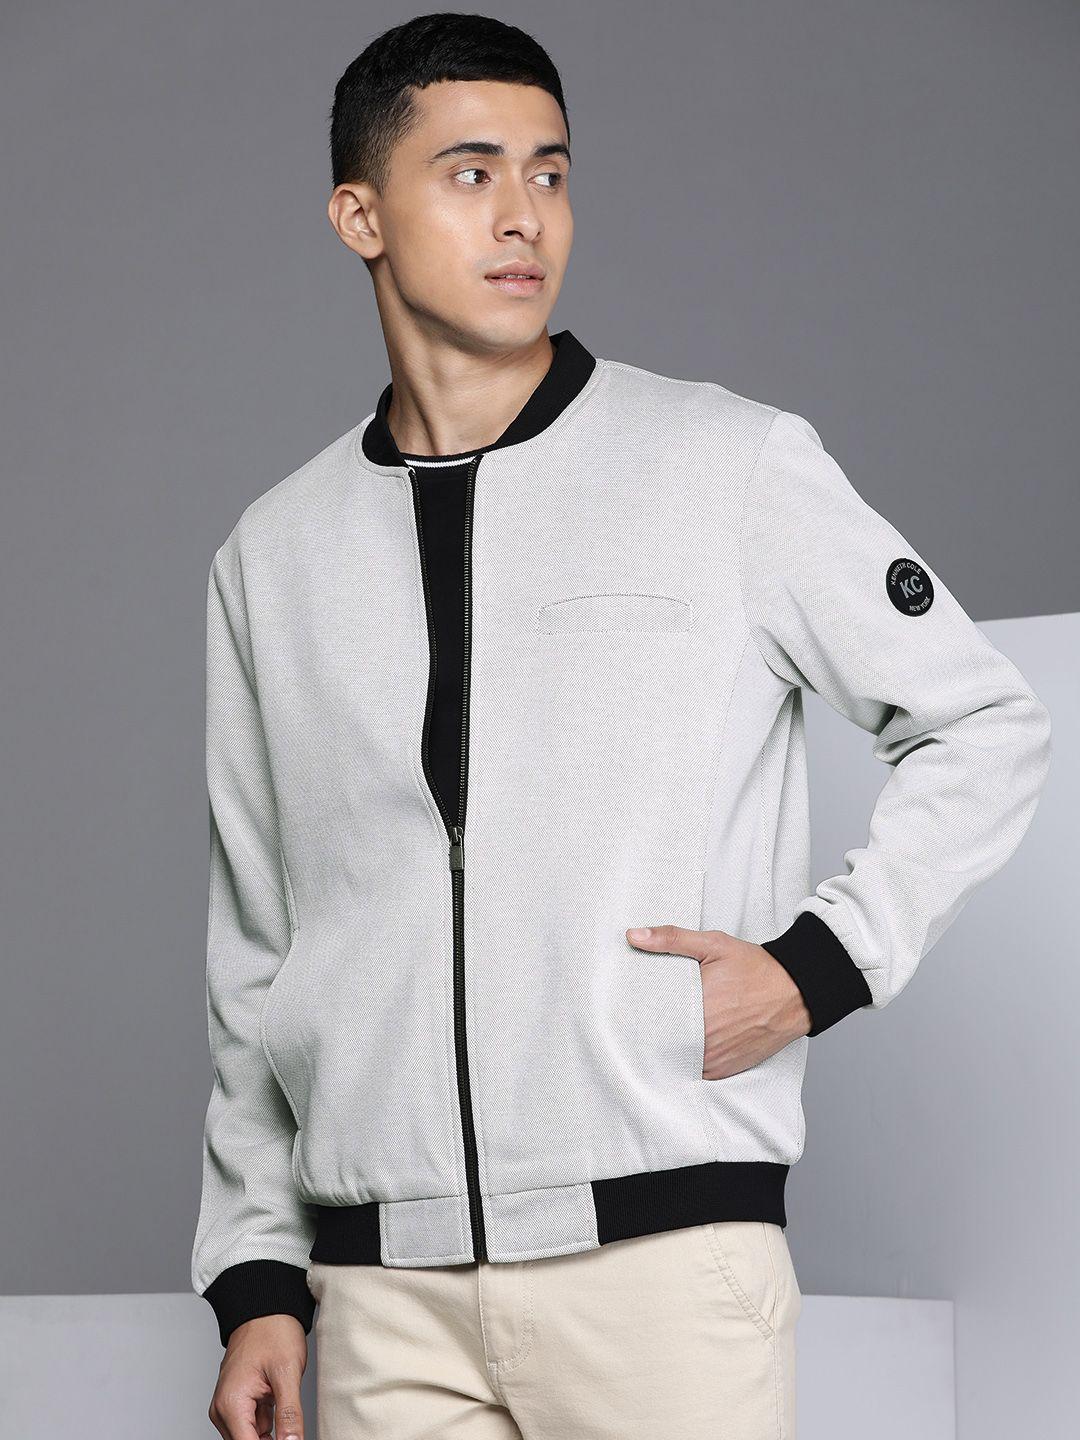 kenneth-cole-el-classico-men-white-black-open-front-long-sleeves-bomber-jacket